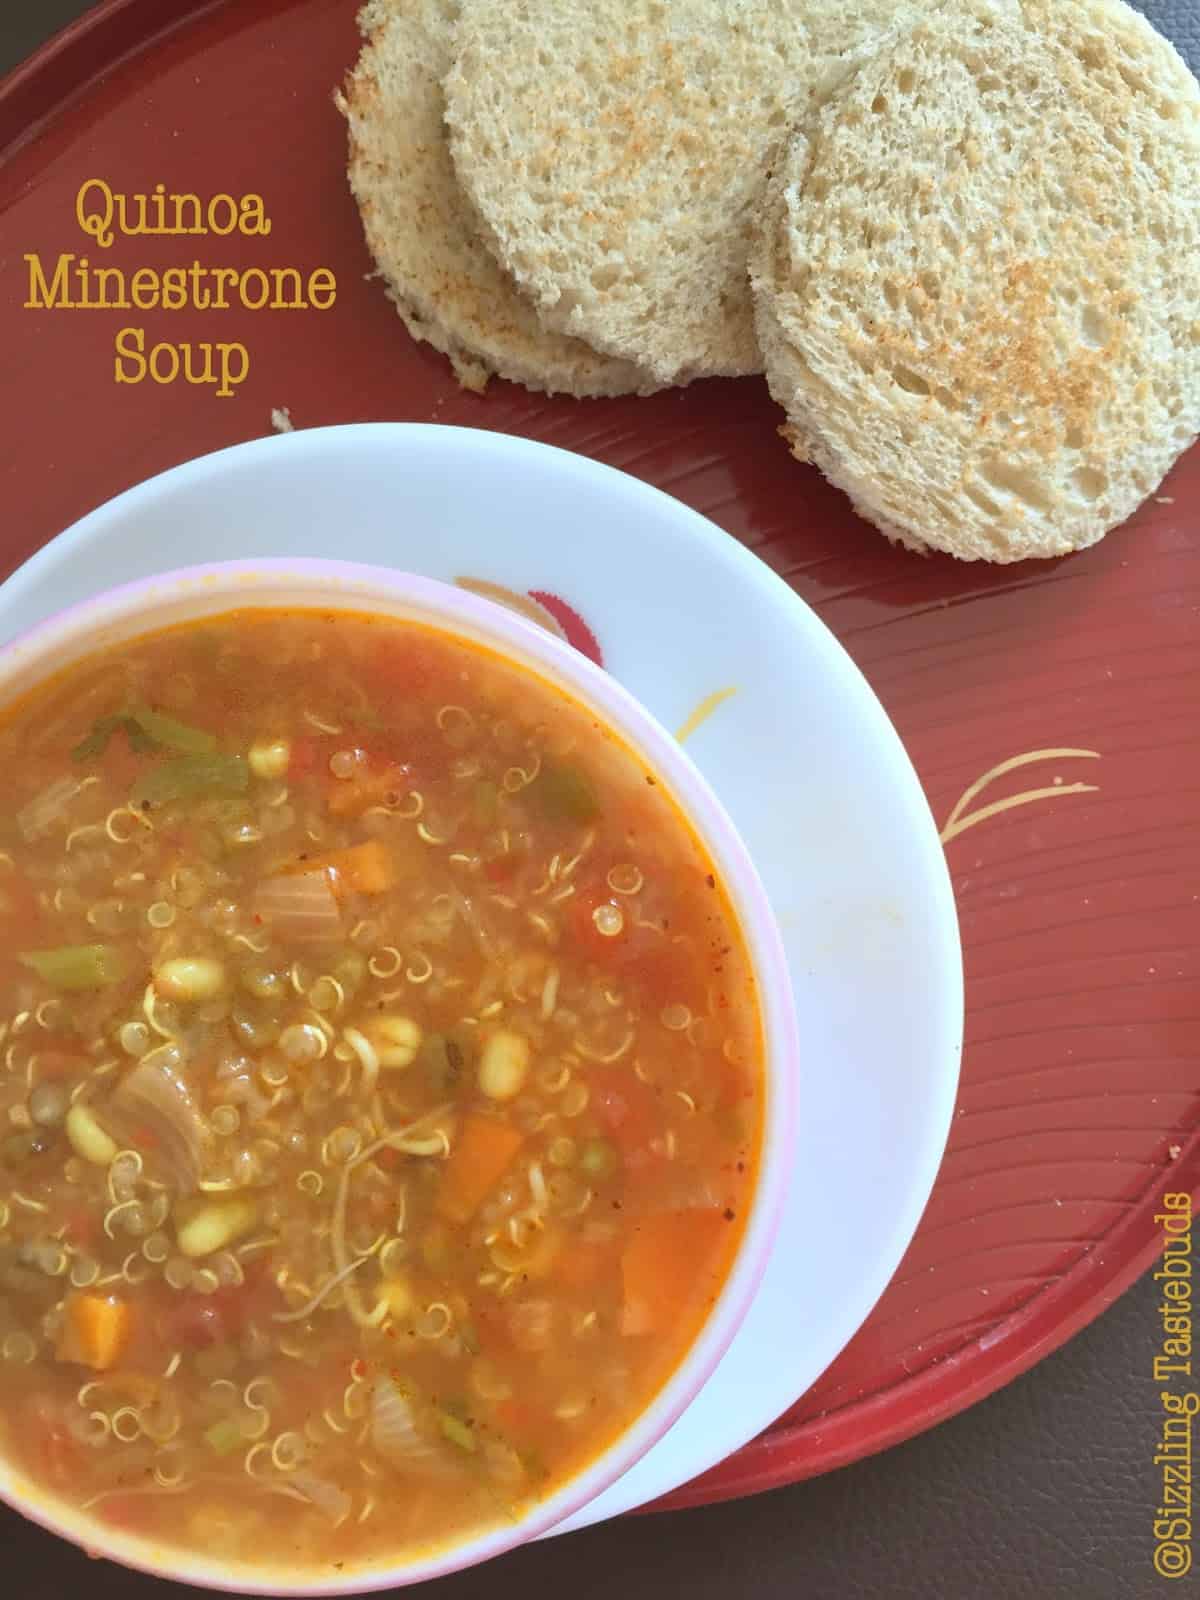 Quinoa Minestrone Soup is a filling and healthy Gluten Free and Vegan dinner or brunch alternative. Perfect for winter or snowy nights as a filling meal.